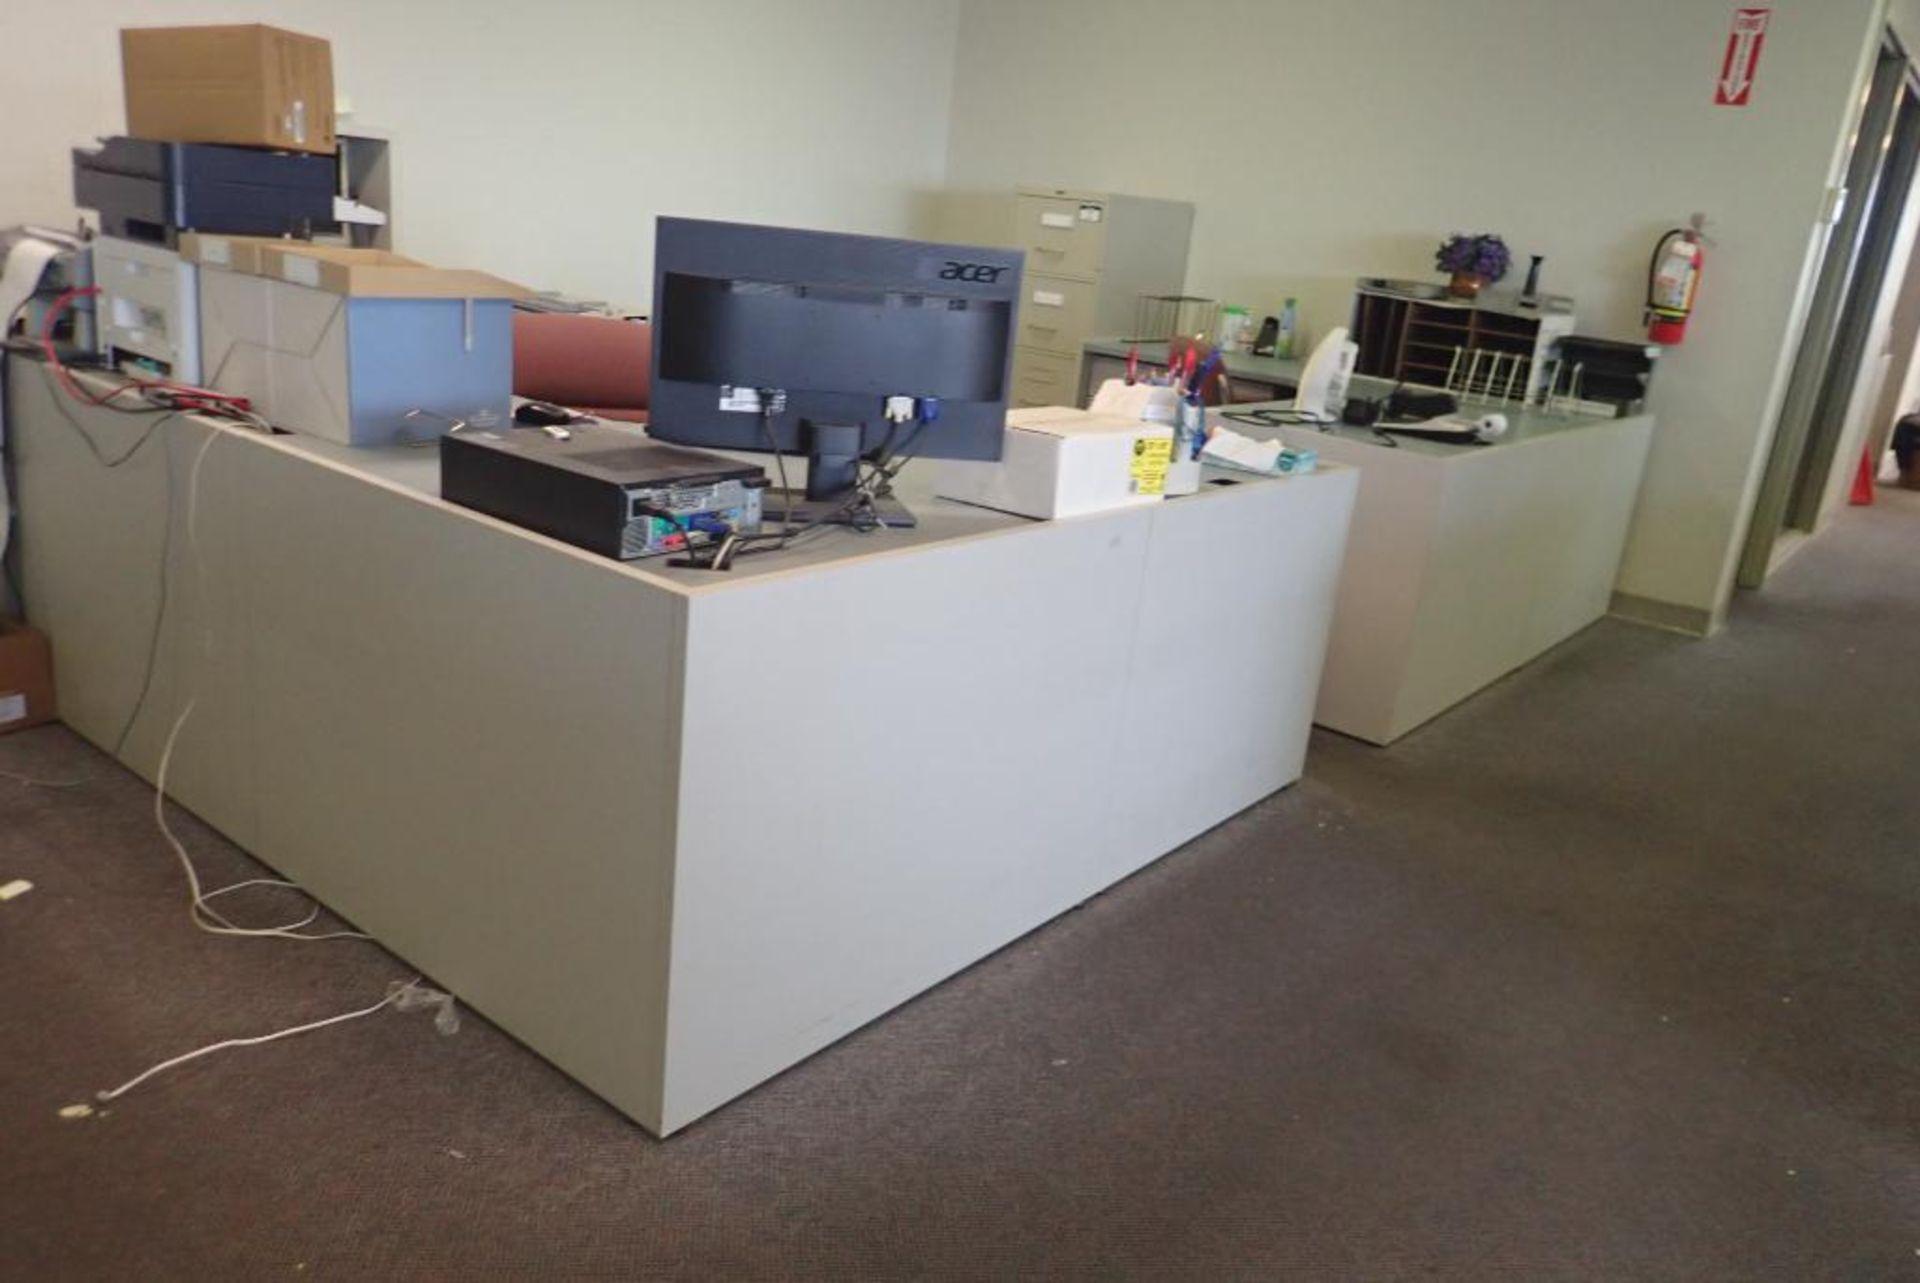 Lot of (2) Desks, (2) Task Chairs, Vertical 4-Drawer File Cabinet, and Asst. Office Supplies.